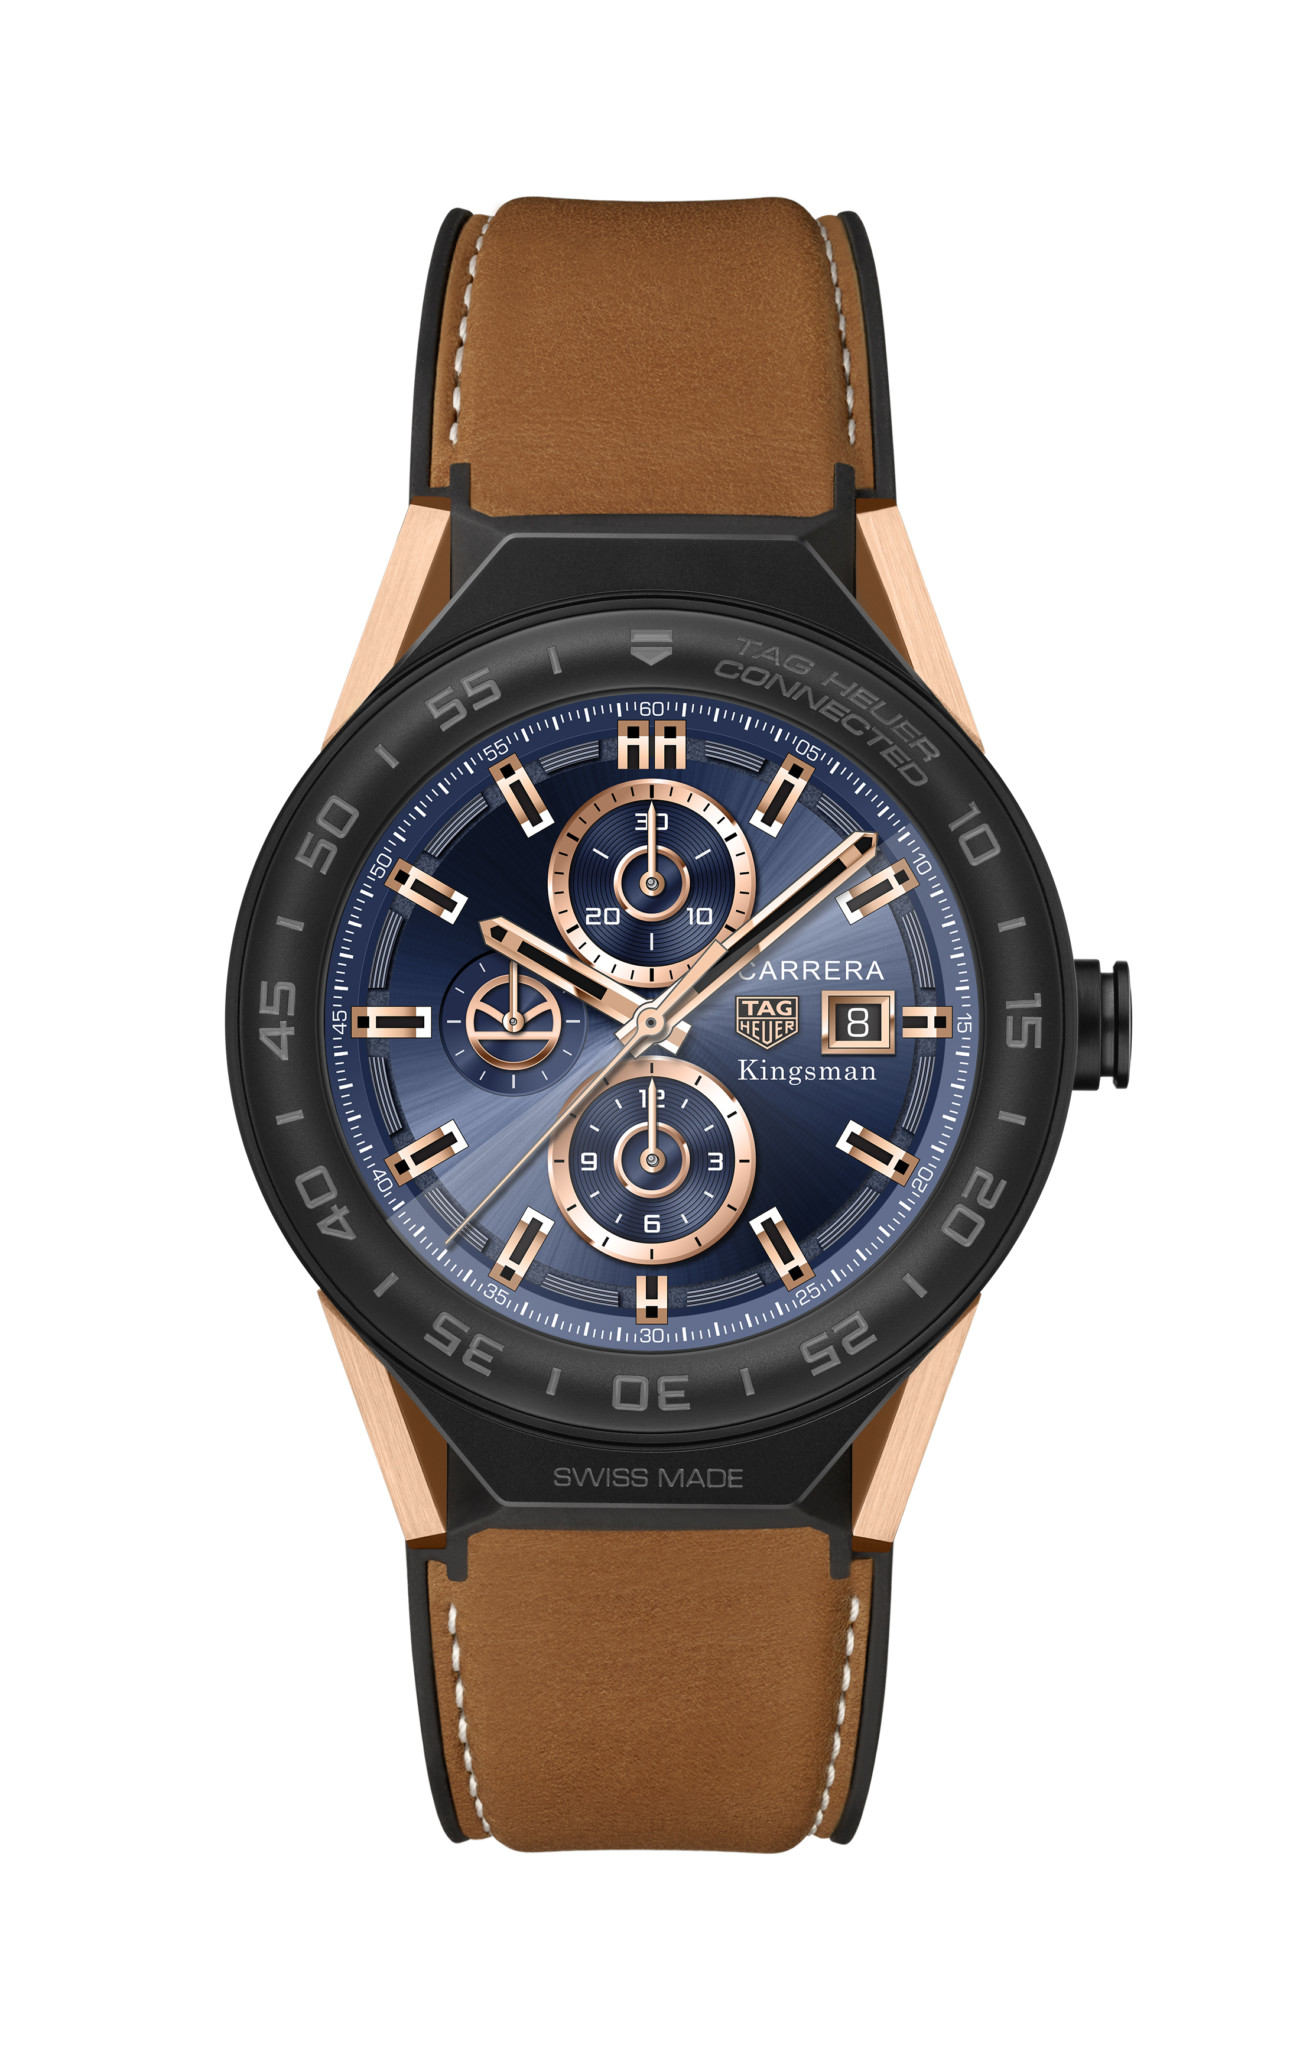 Tag heuer sbf8a8023. 32eb0103 kingsman special edition - brown leather strap 2017 hdallumé